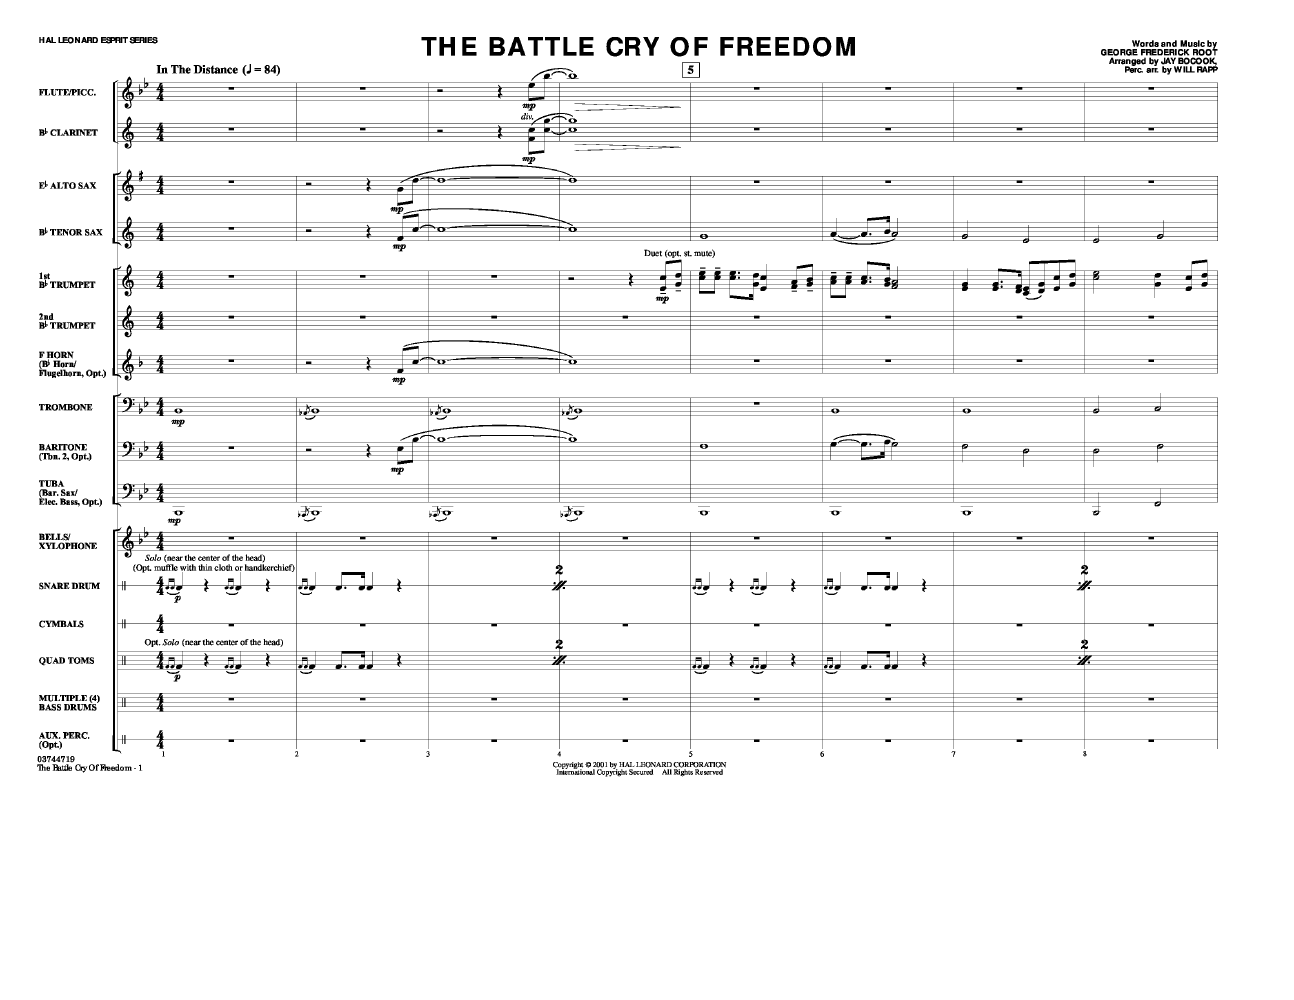 BATTLE CRY OF FREEDOM